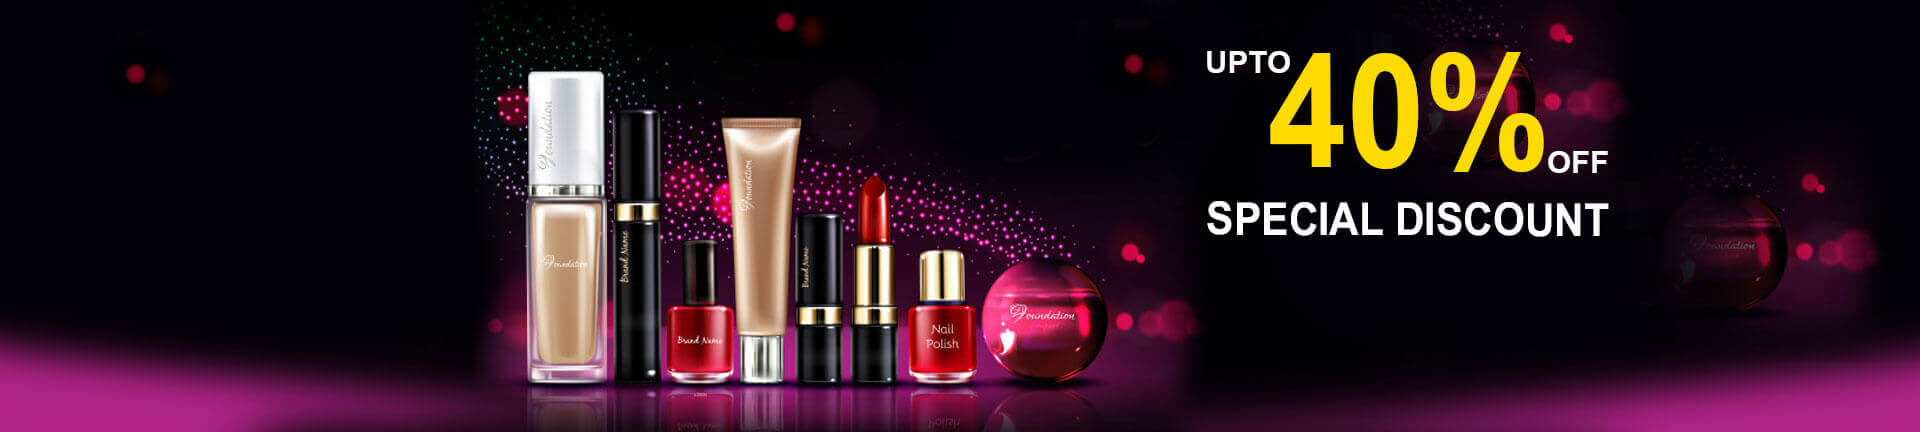 Buy Makeup Products for Girls & Women at Best Price in Pakistan